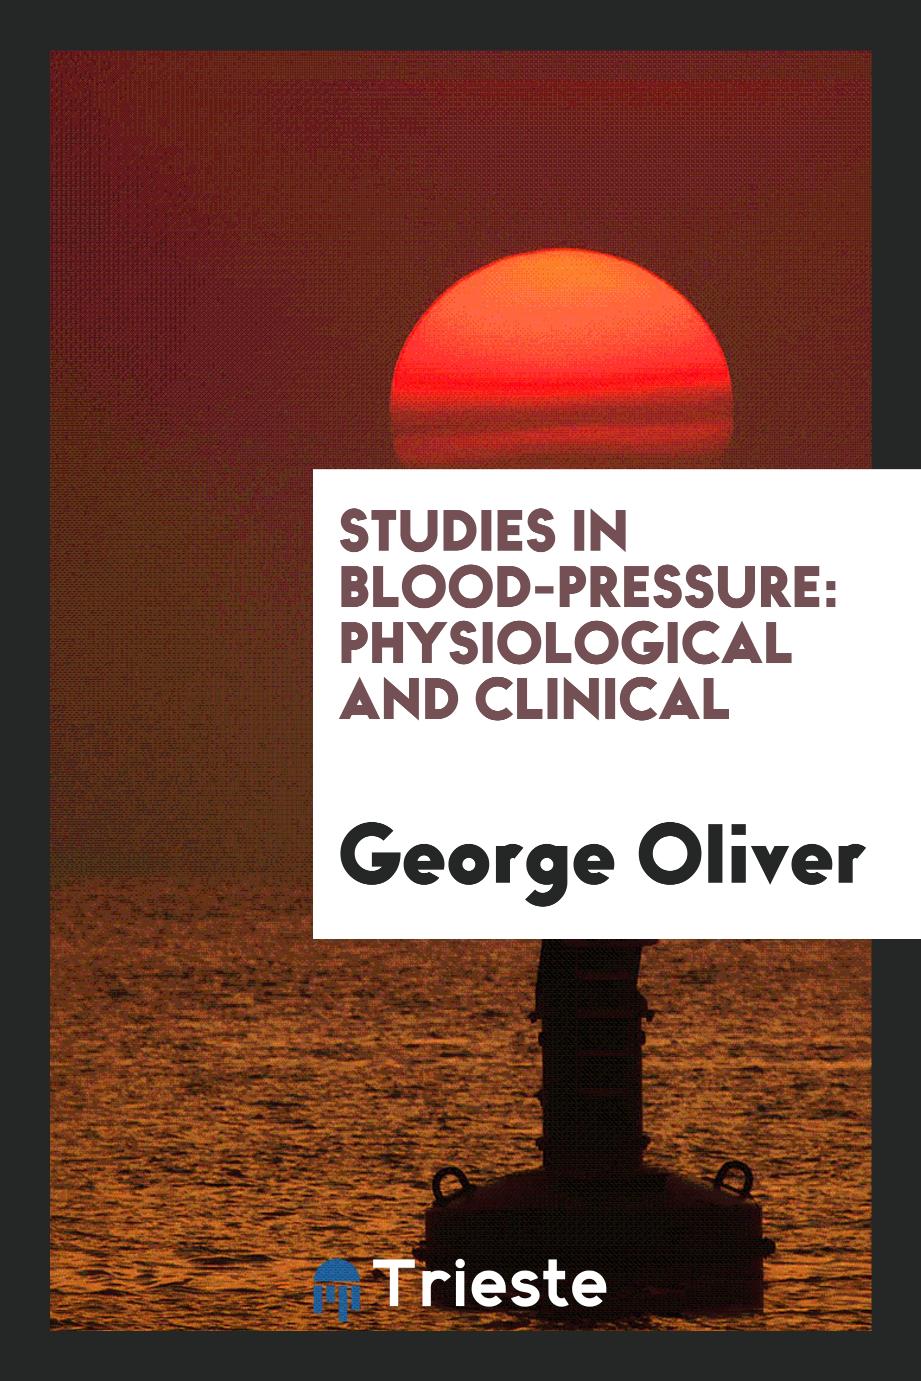 Studies in blood-pressure: physiological and clinical